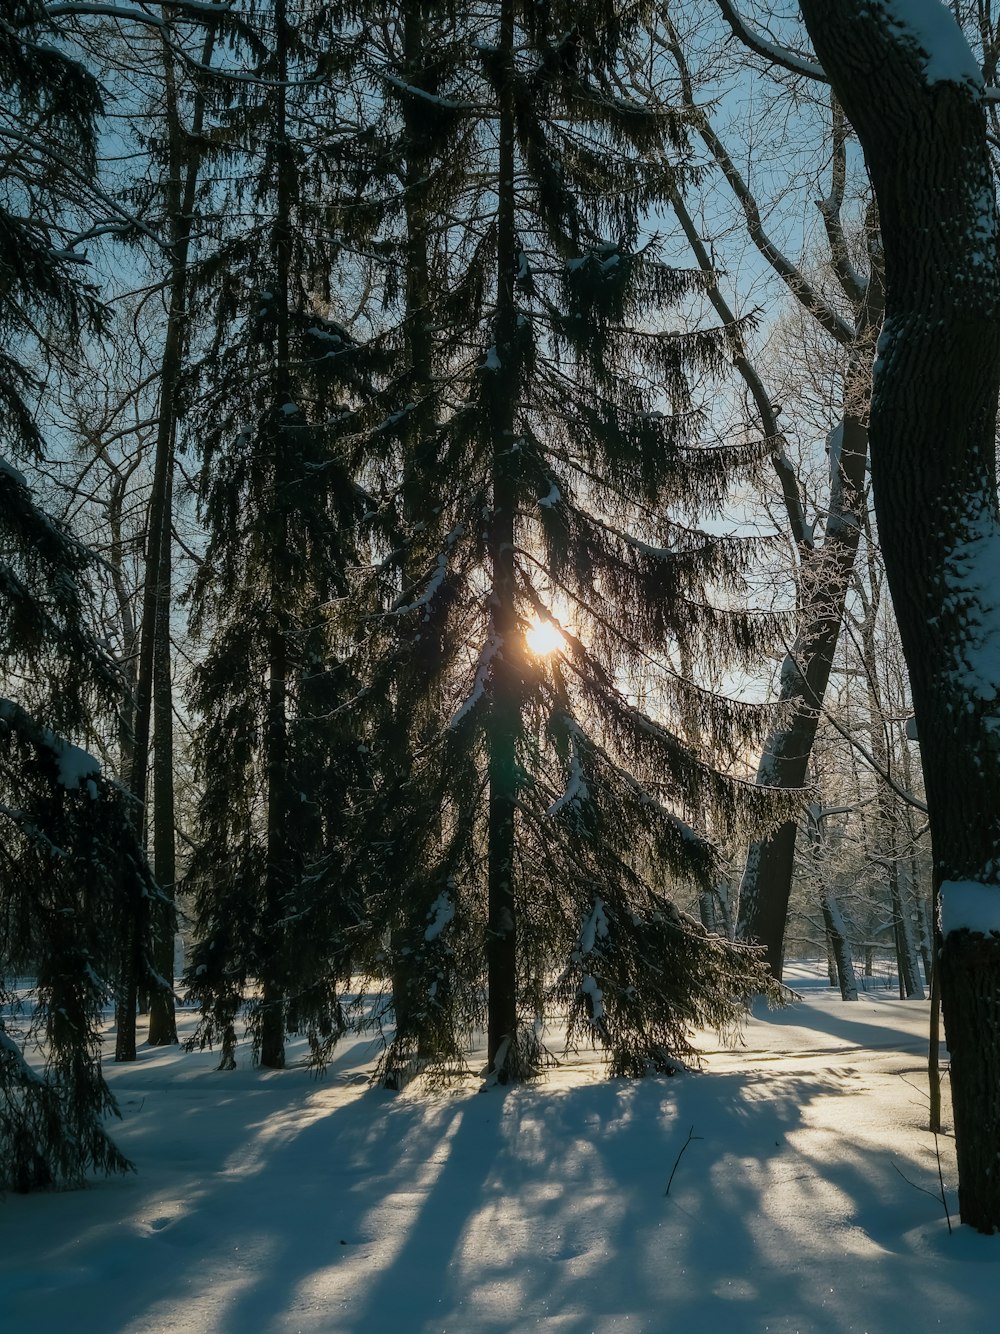 the sun is shining through the trees in the snow